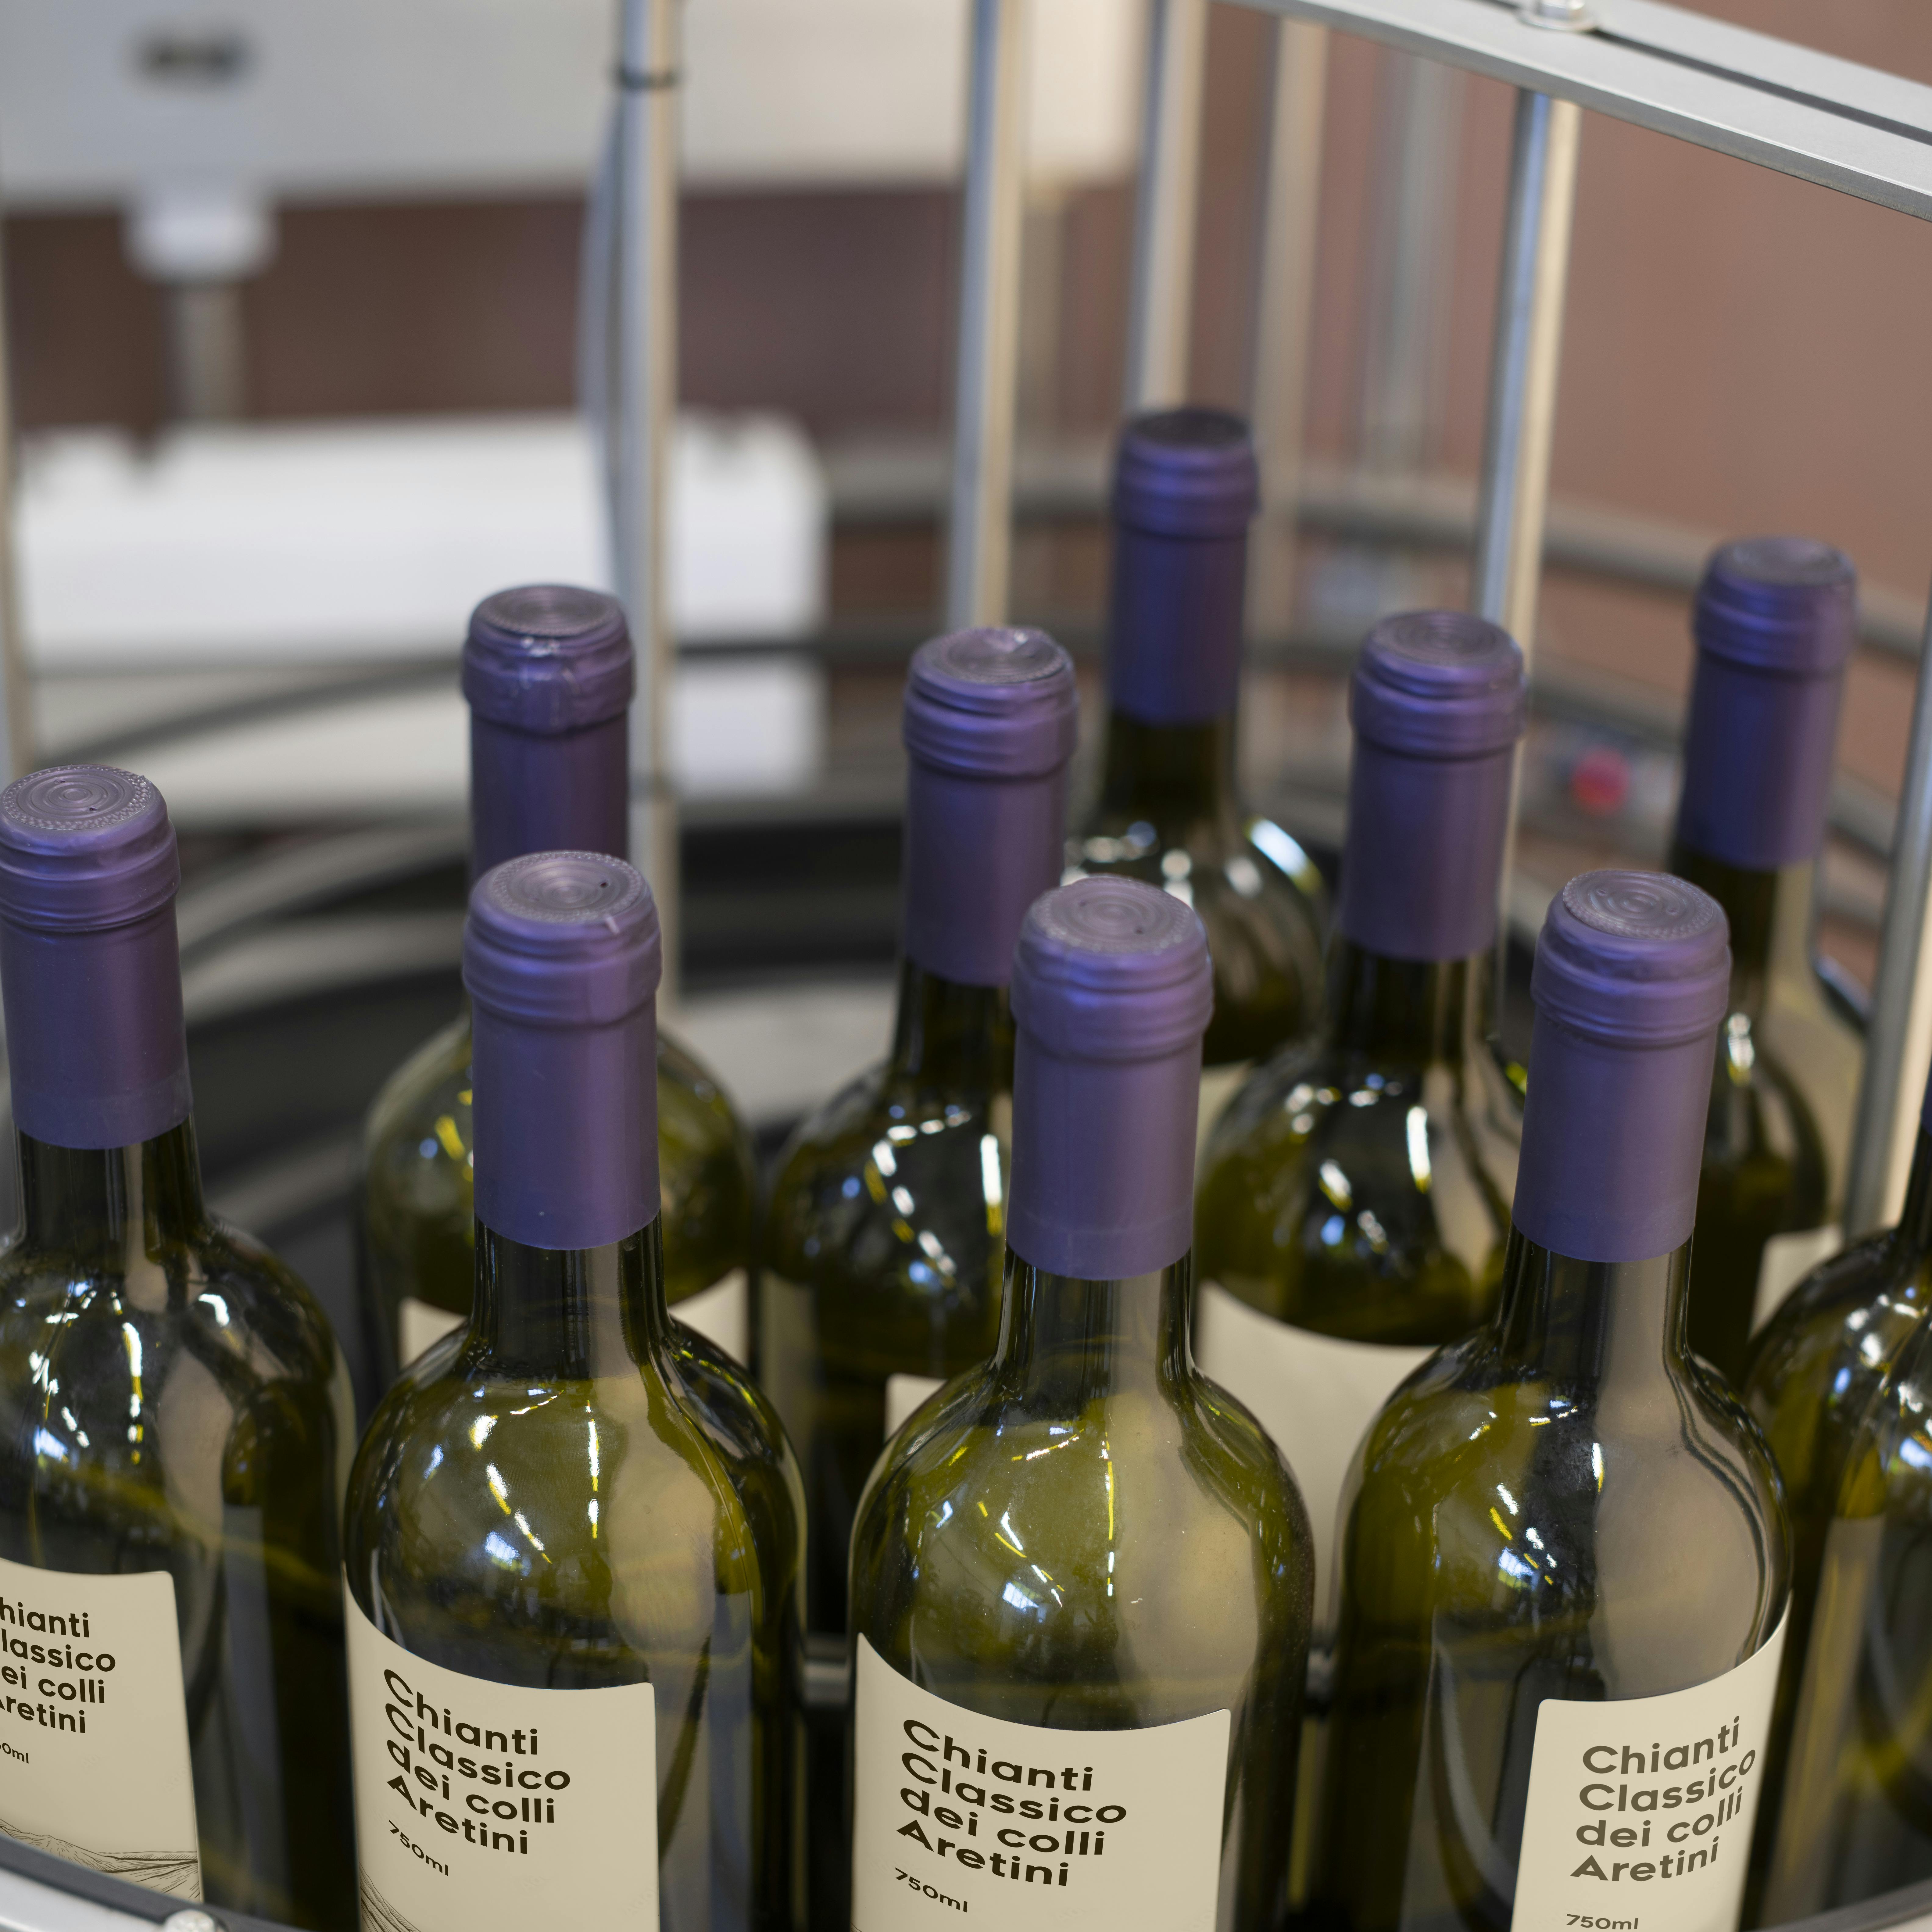 A table suitable for the accumulation of bottles, in this case there are bottles of wine with purple caps and personalized Quinti label